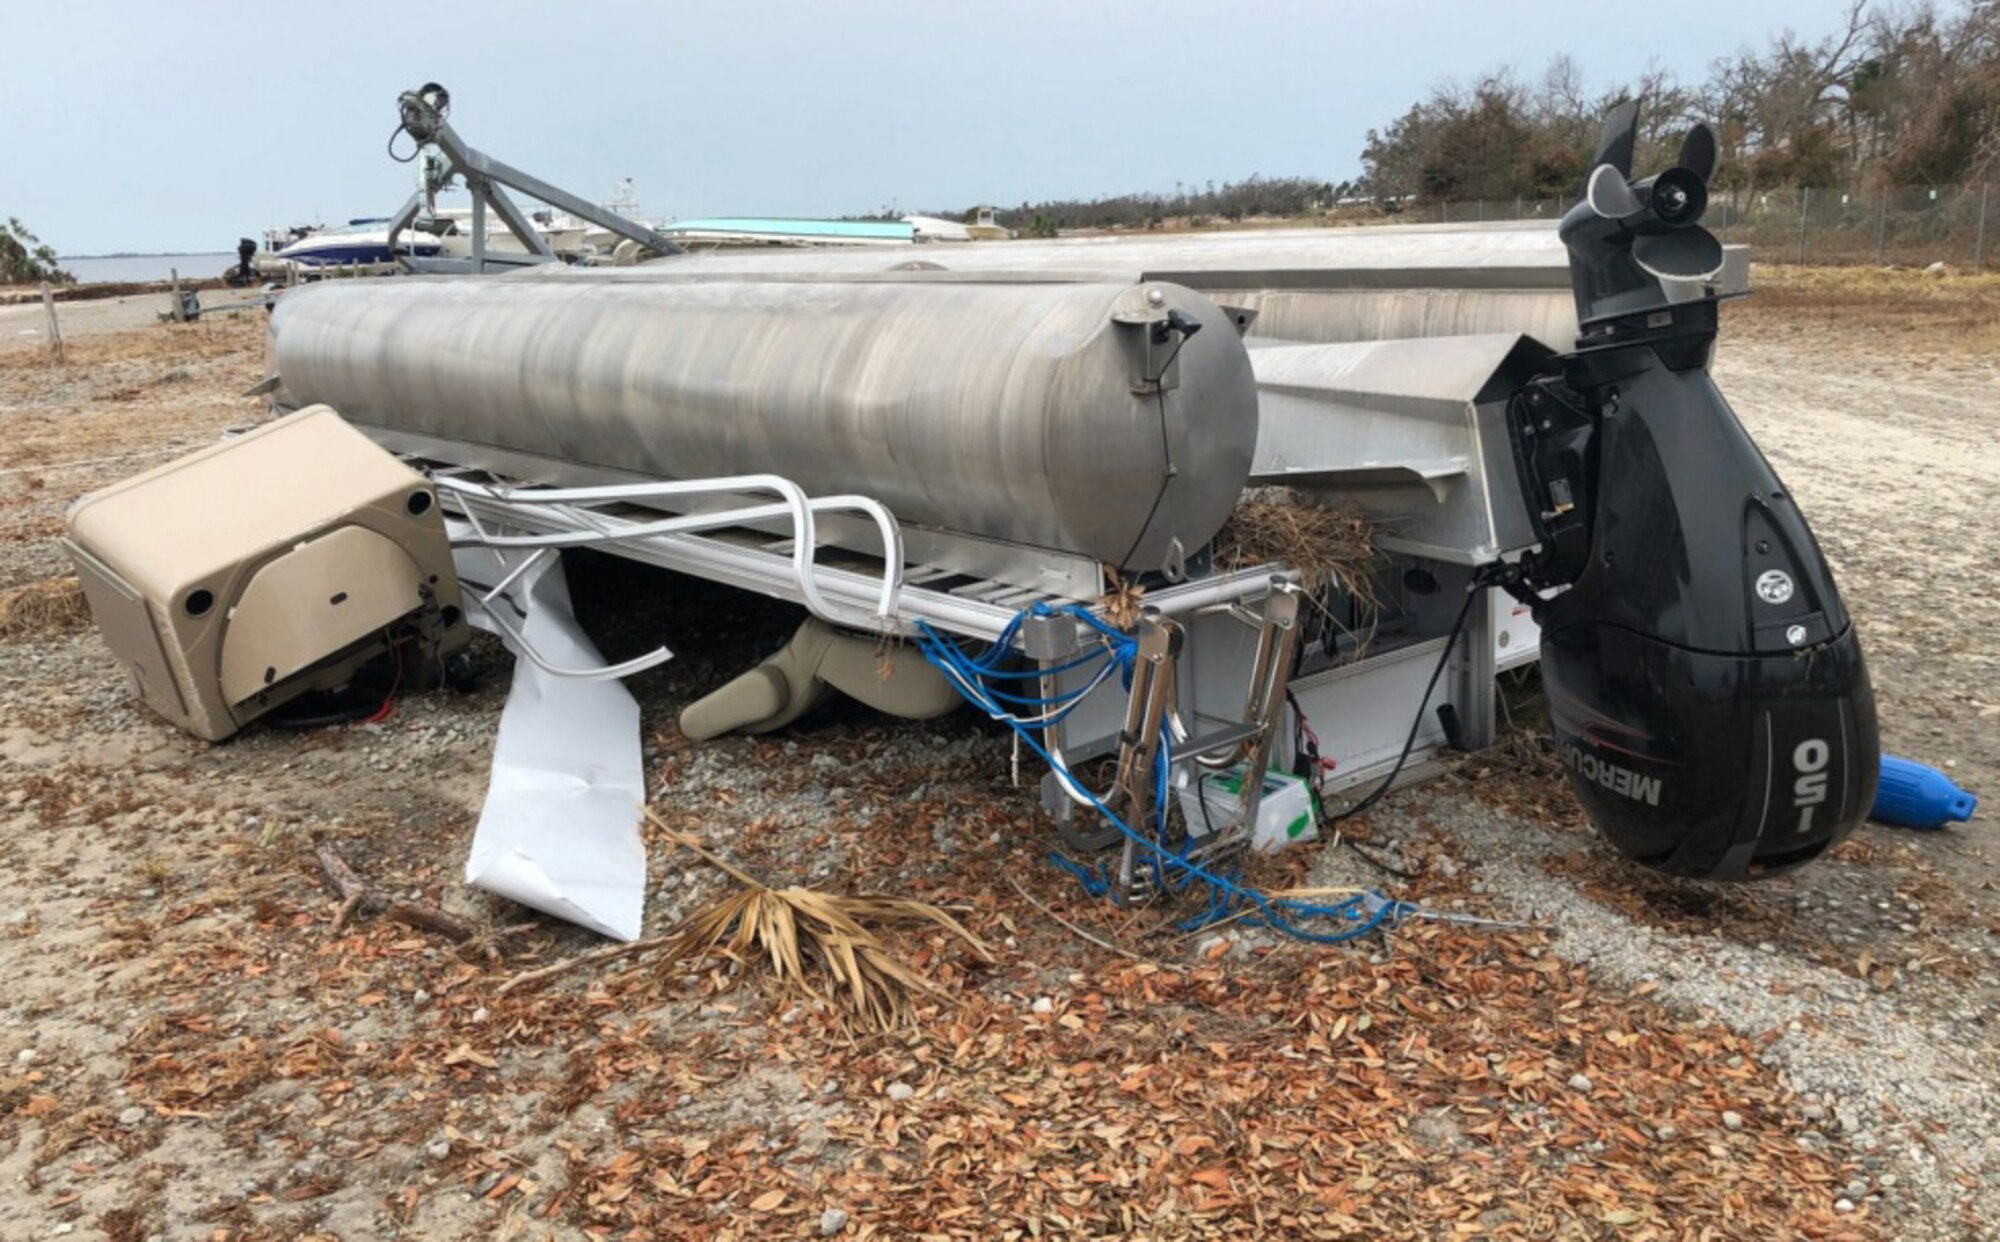 Hurricane Michael overturned boats at the Tyndall AFB, Florida, marina, including one that belongs to Linda Le-Barron-Block, who is part of the AFIMSC Resources Directorate team at Tyndall.